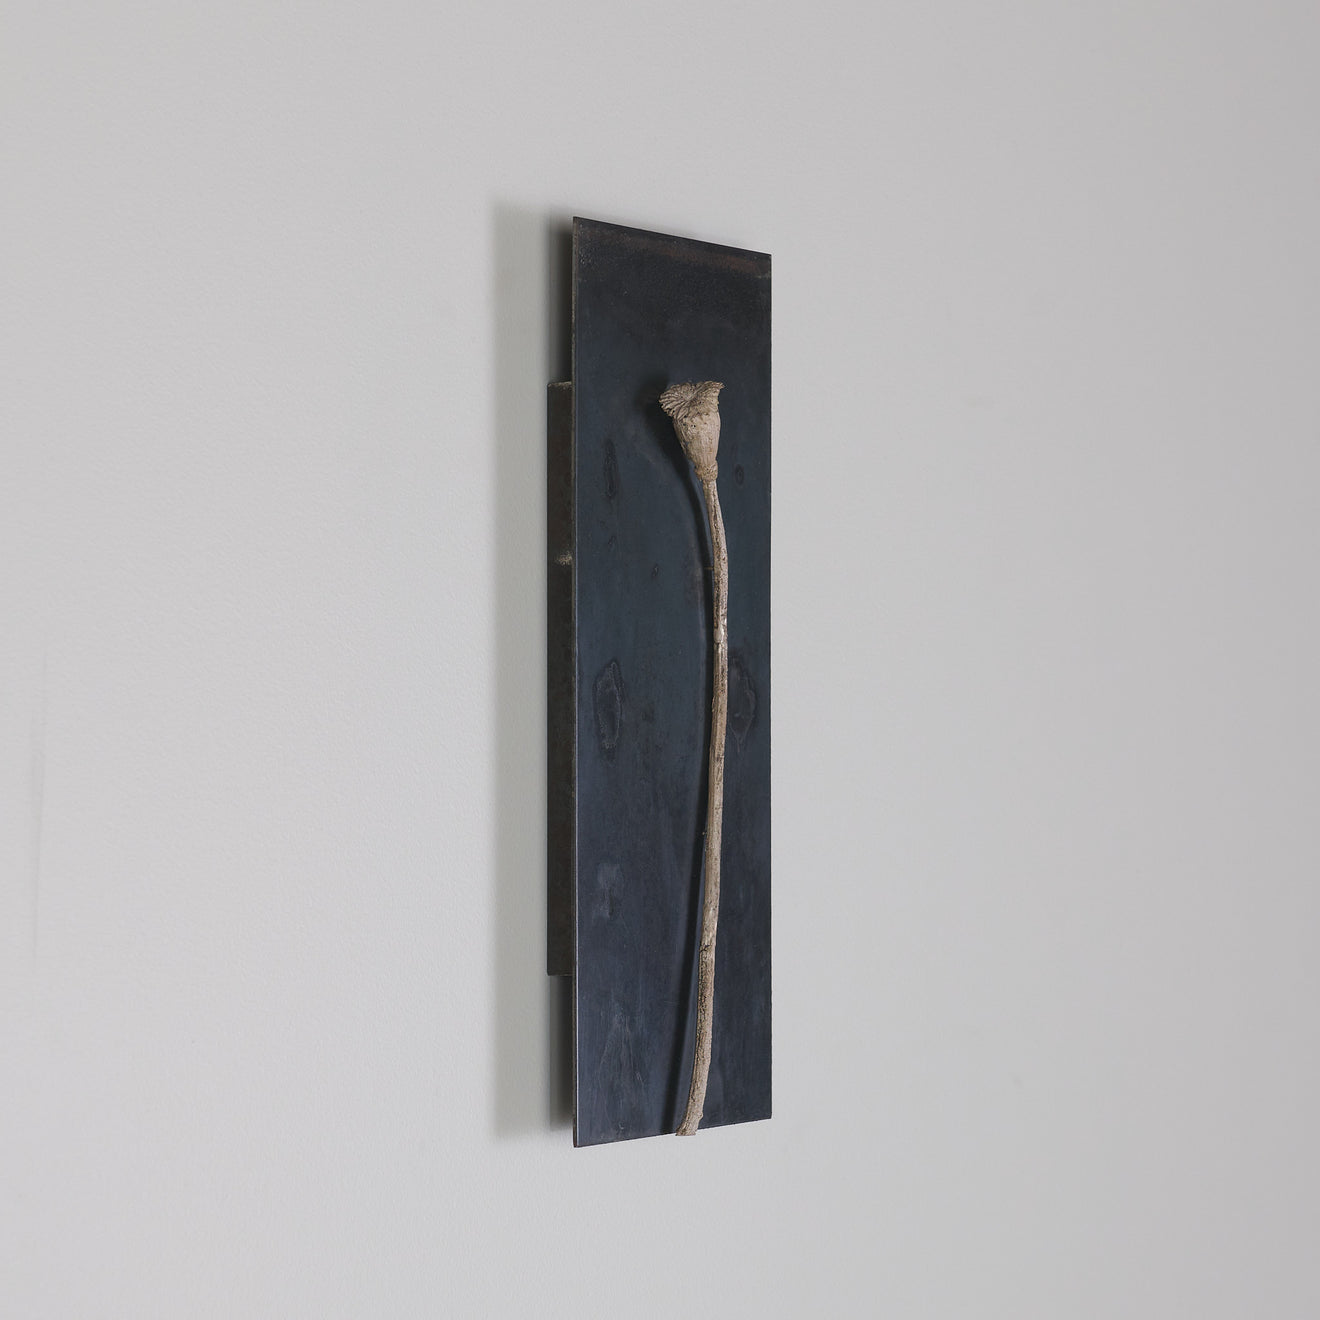 WALL PIECE WITH POPPY, AN HOMAGE TO ANSELM KEIFFER BY DIANE TINTOR